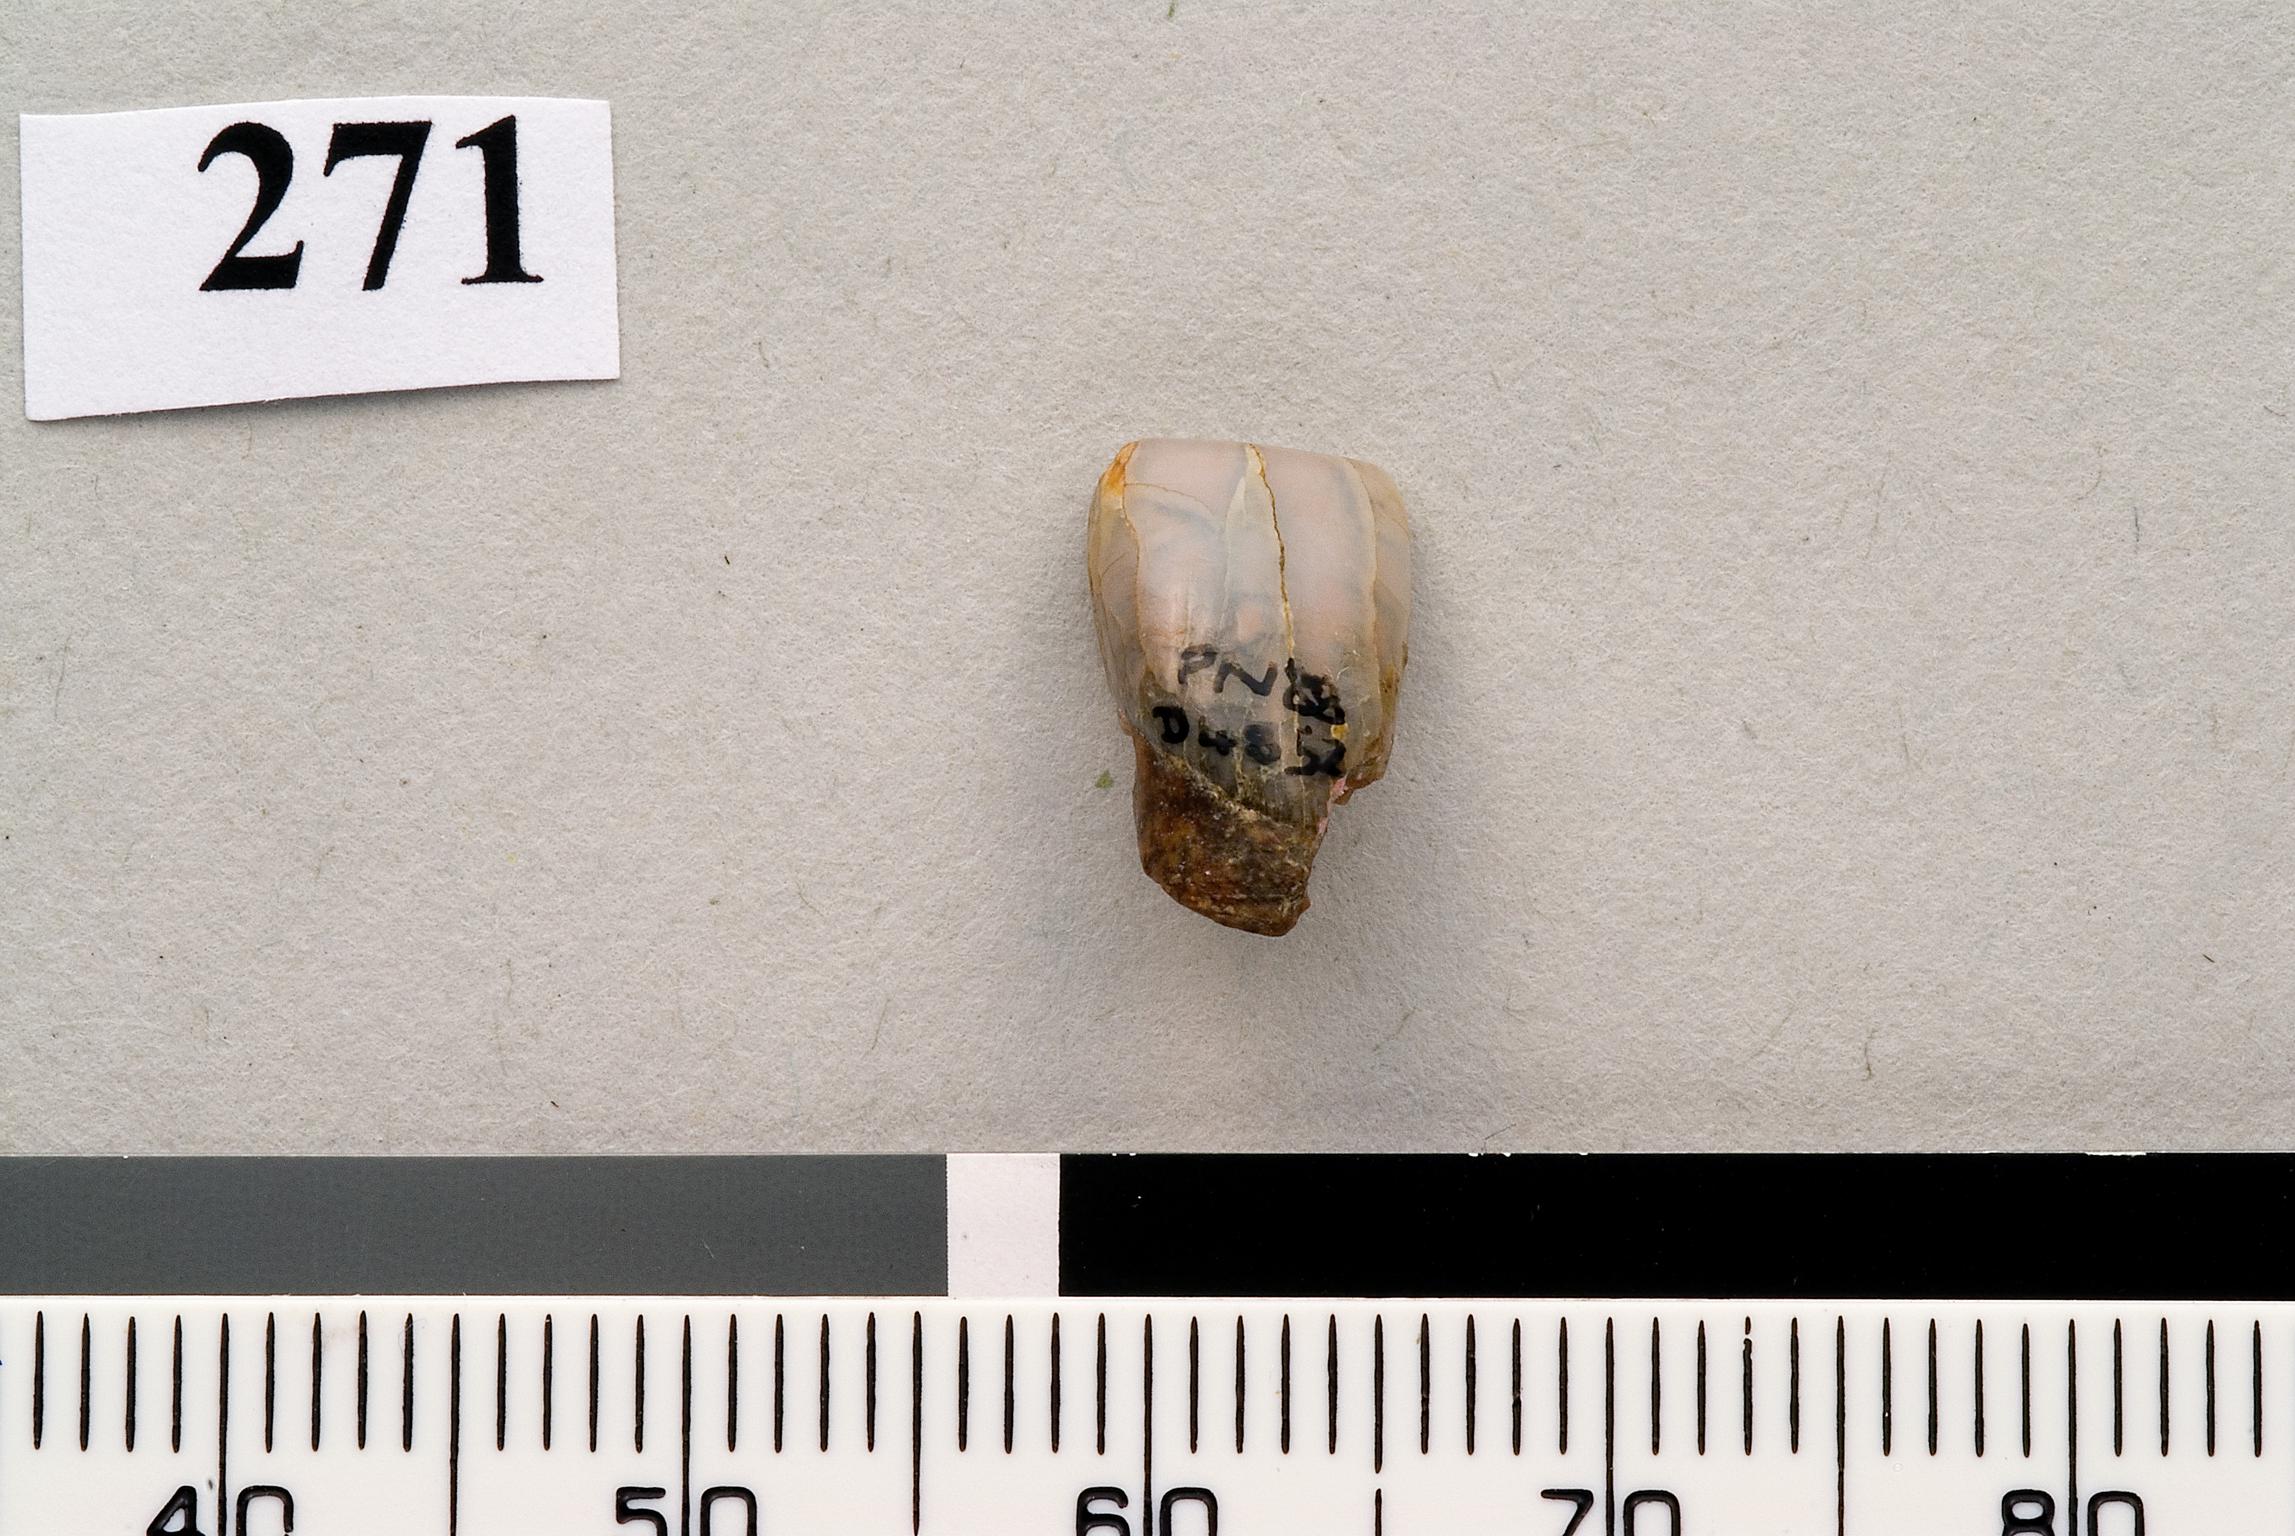 Lower Palaeolithic Neanderthal incisor